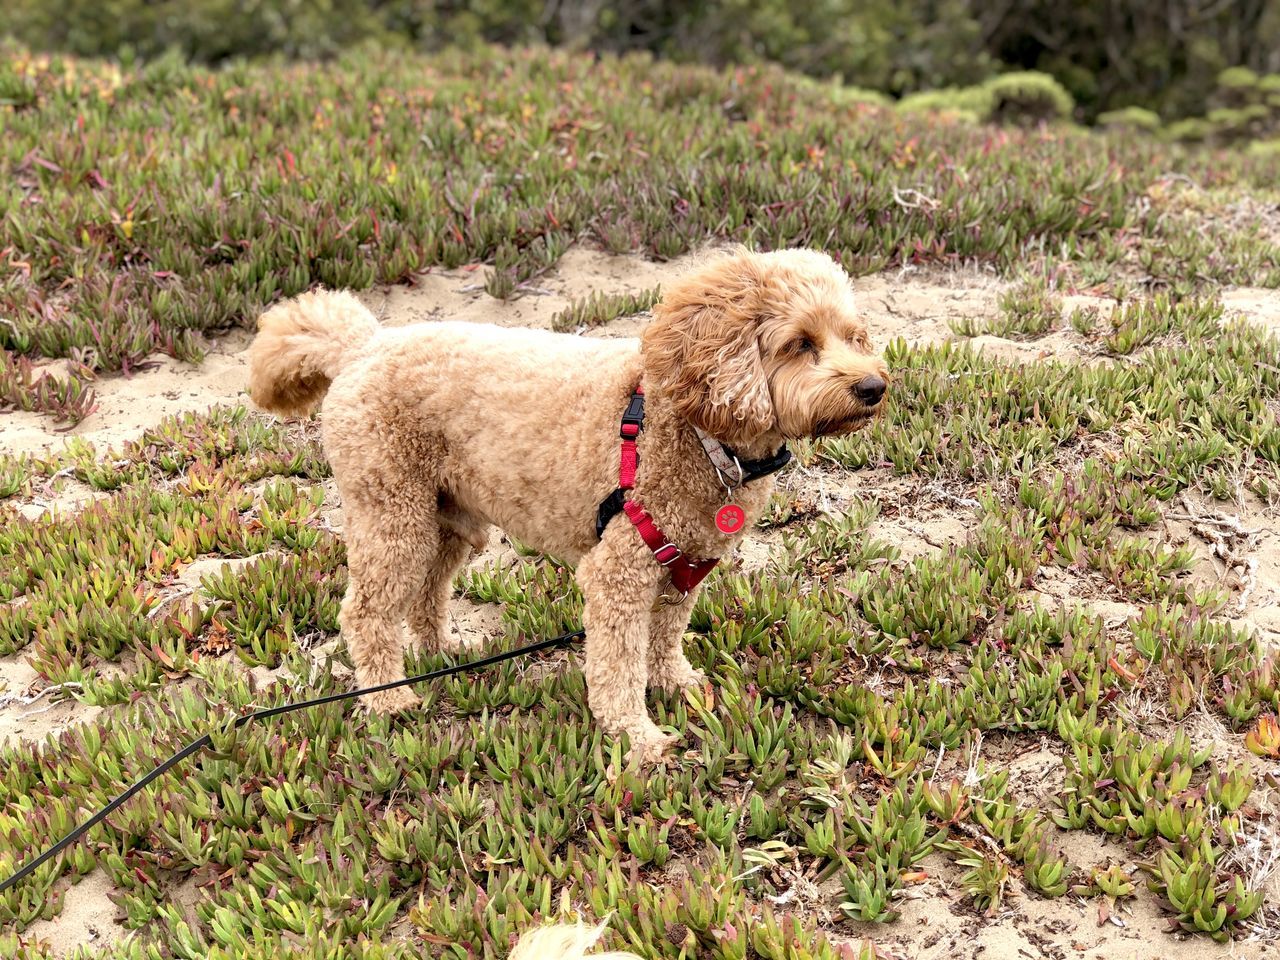 animal themes, one animal, canine, dog, mammal, animal, domestic animals, pet, grass, plant, nature, no people, poodle, land, cute, lap dog, field, day, young animal, outdoors, green, puppy, collar